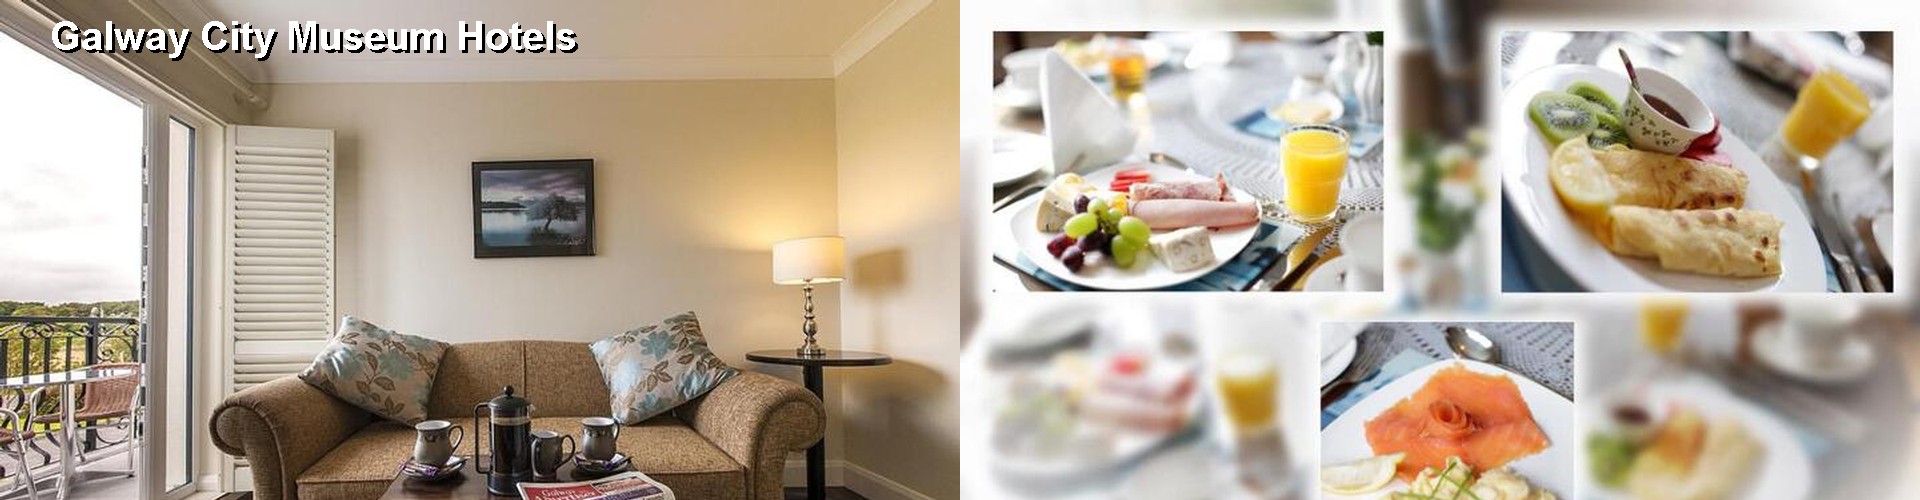 5 Best Hotels near Galway City Museum